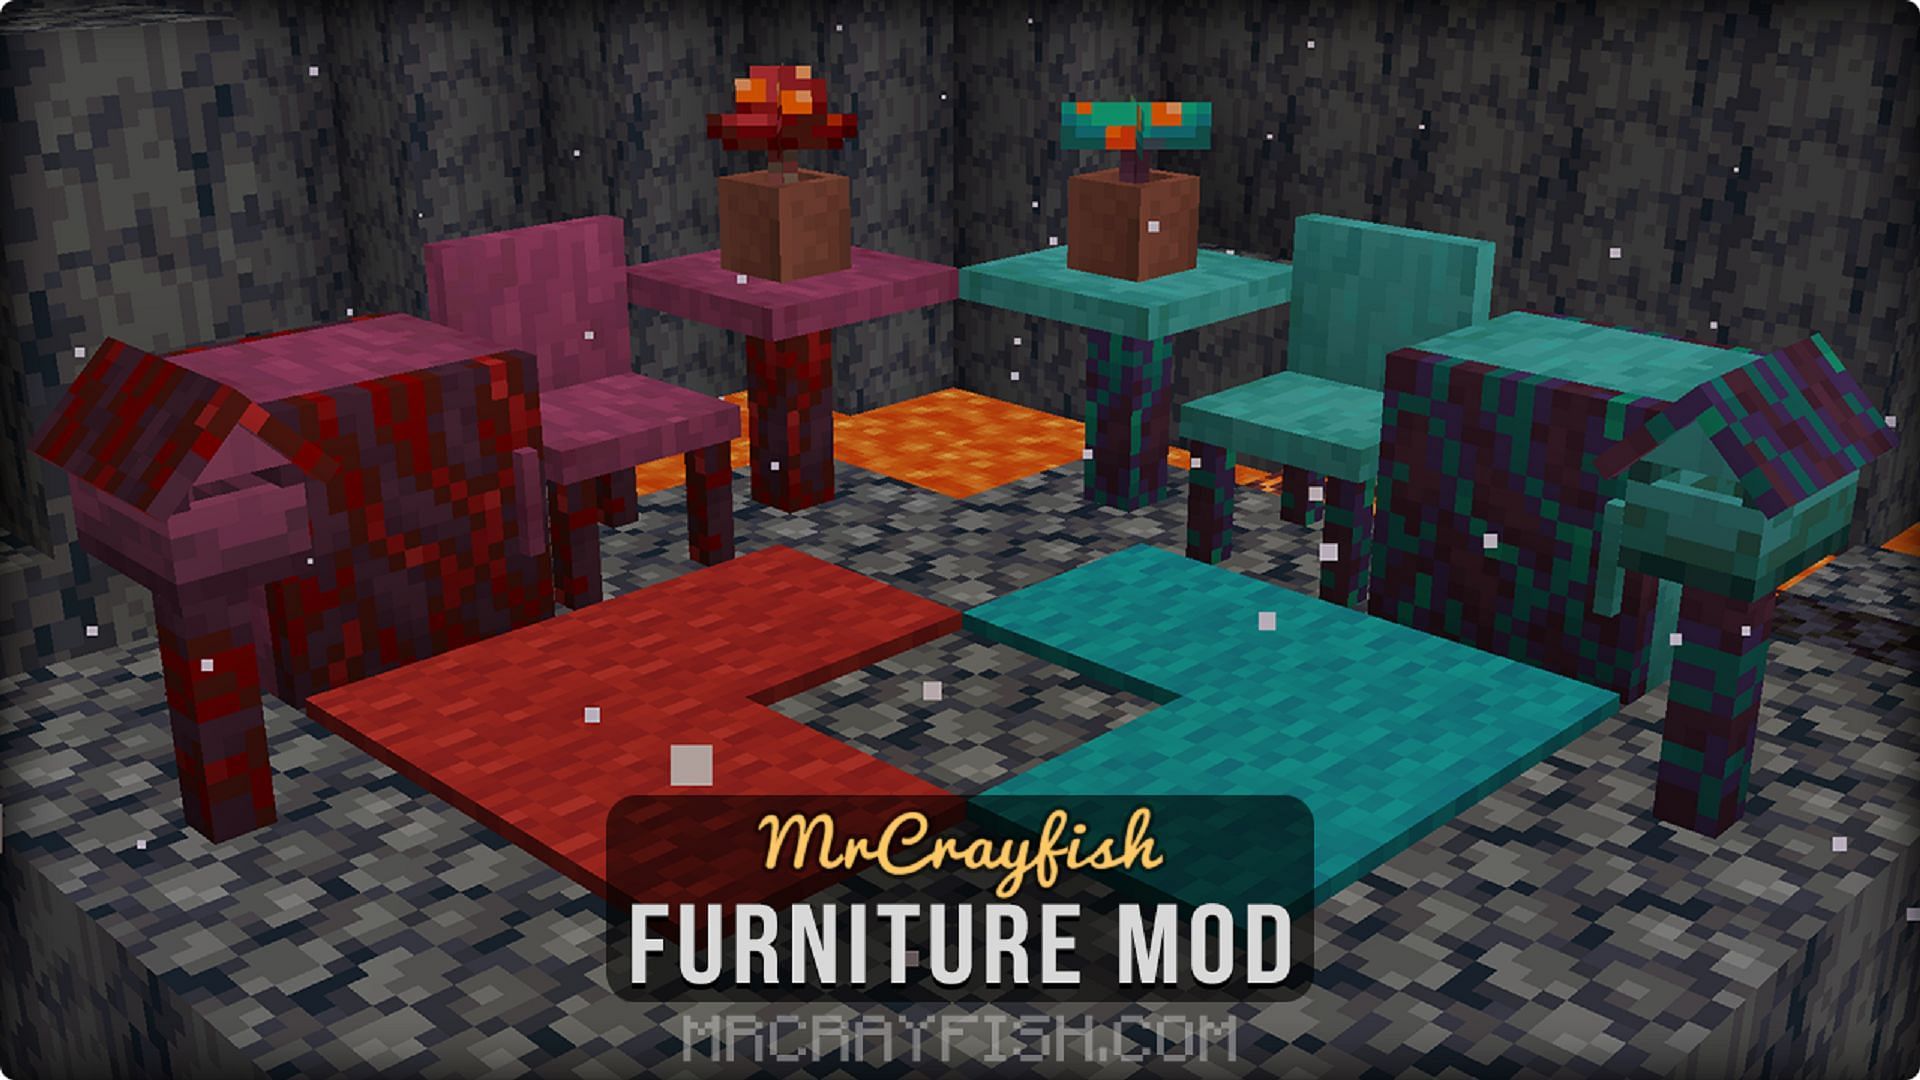 Crimson and warped Nether furniture from the mod (Image via MrCrayfish/CurseForge)